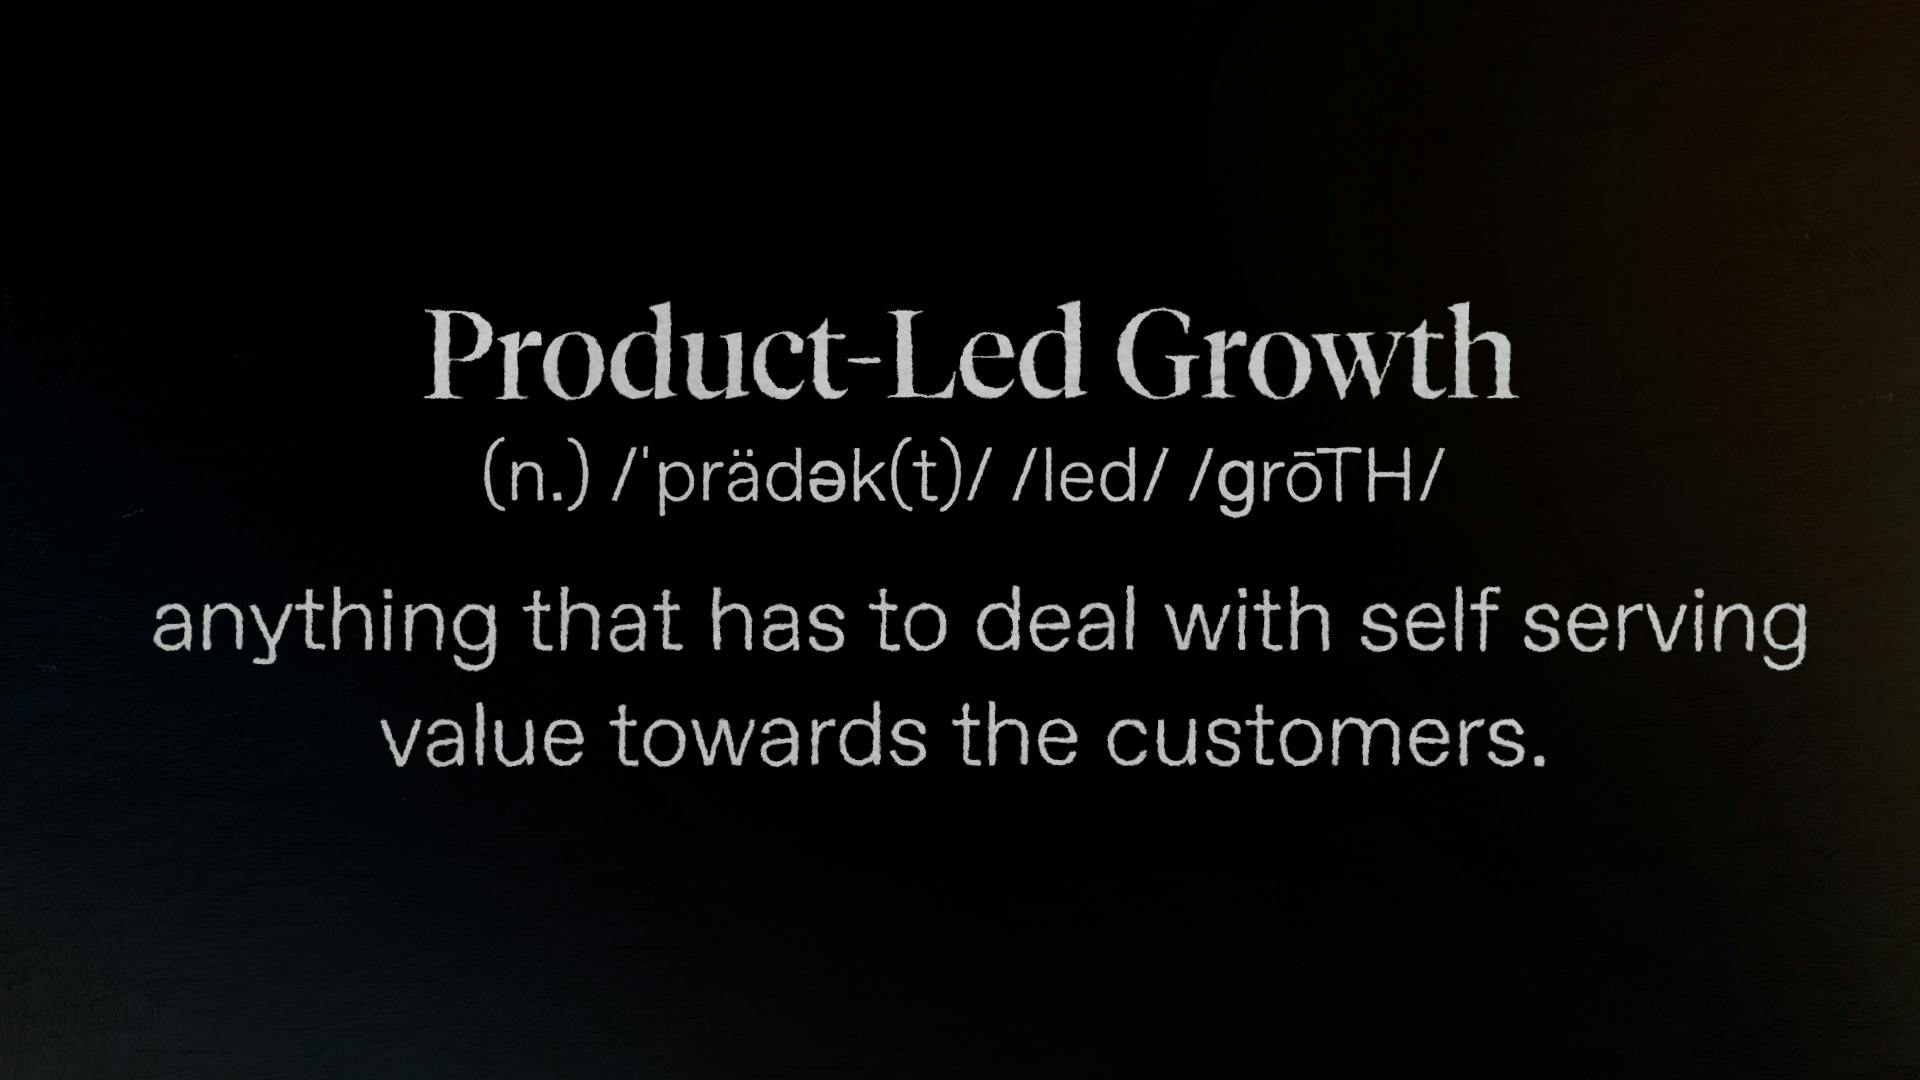 Product-Led Growth Definition